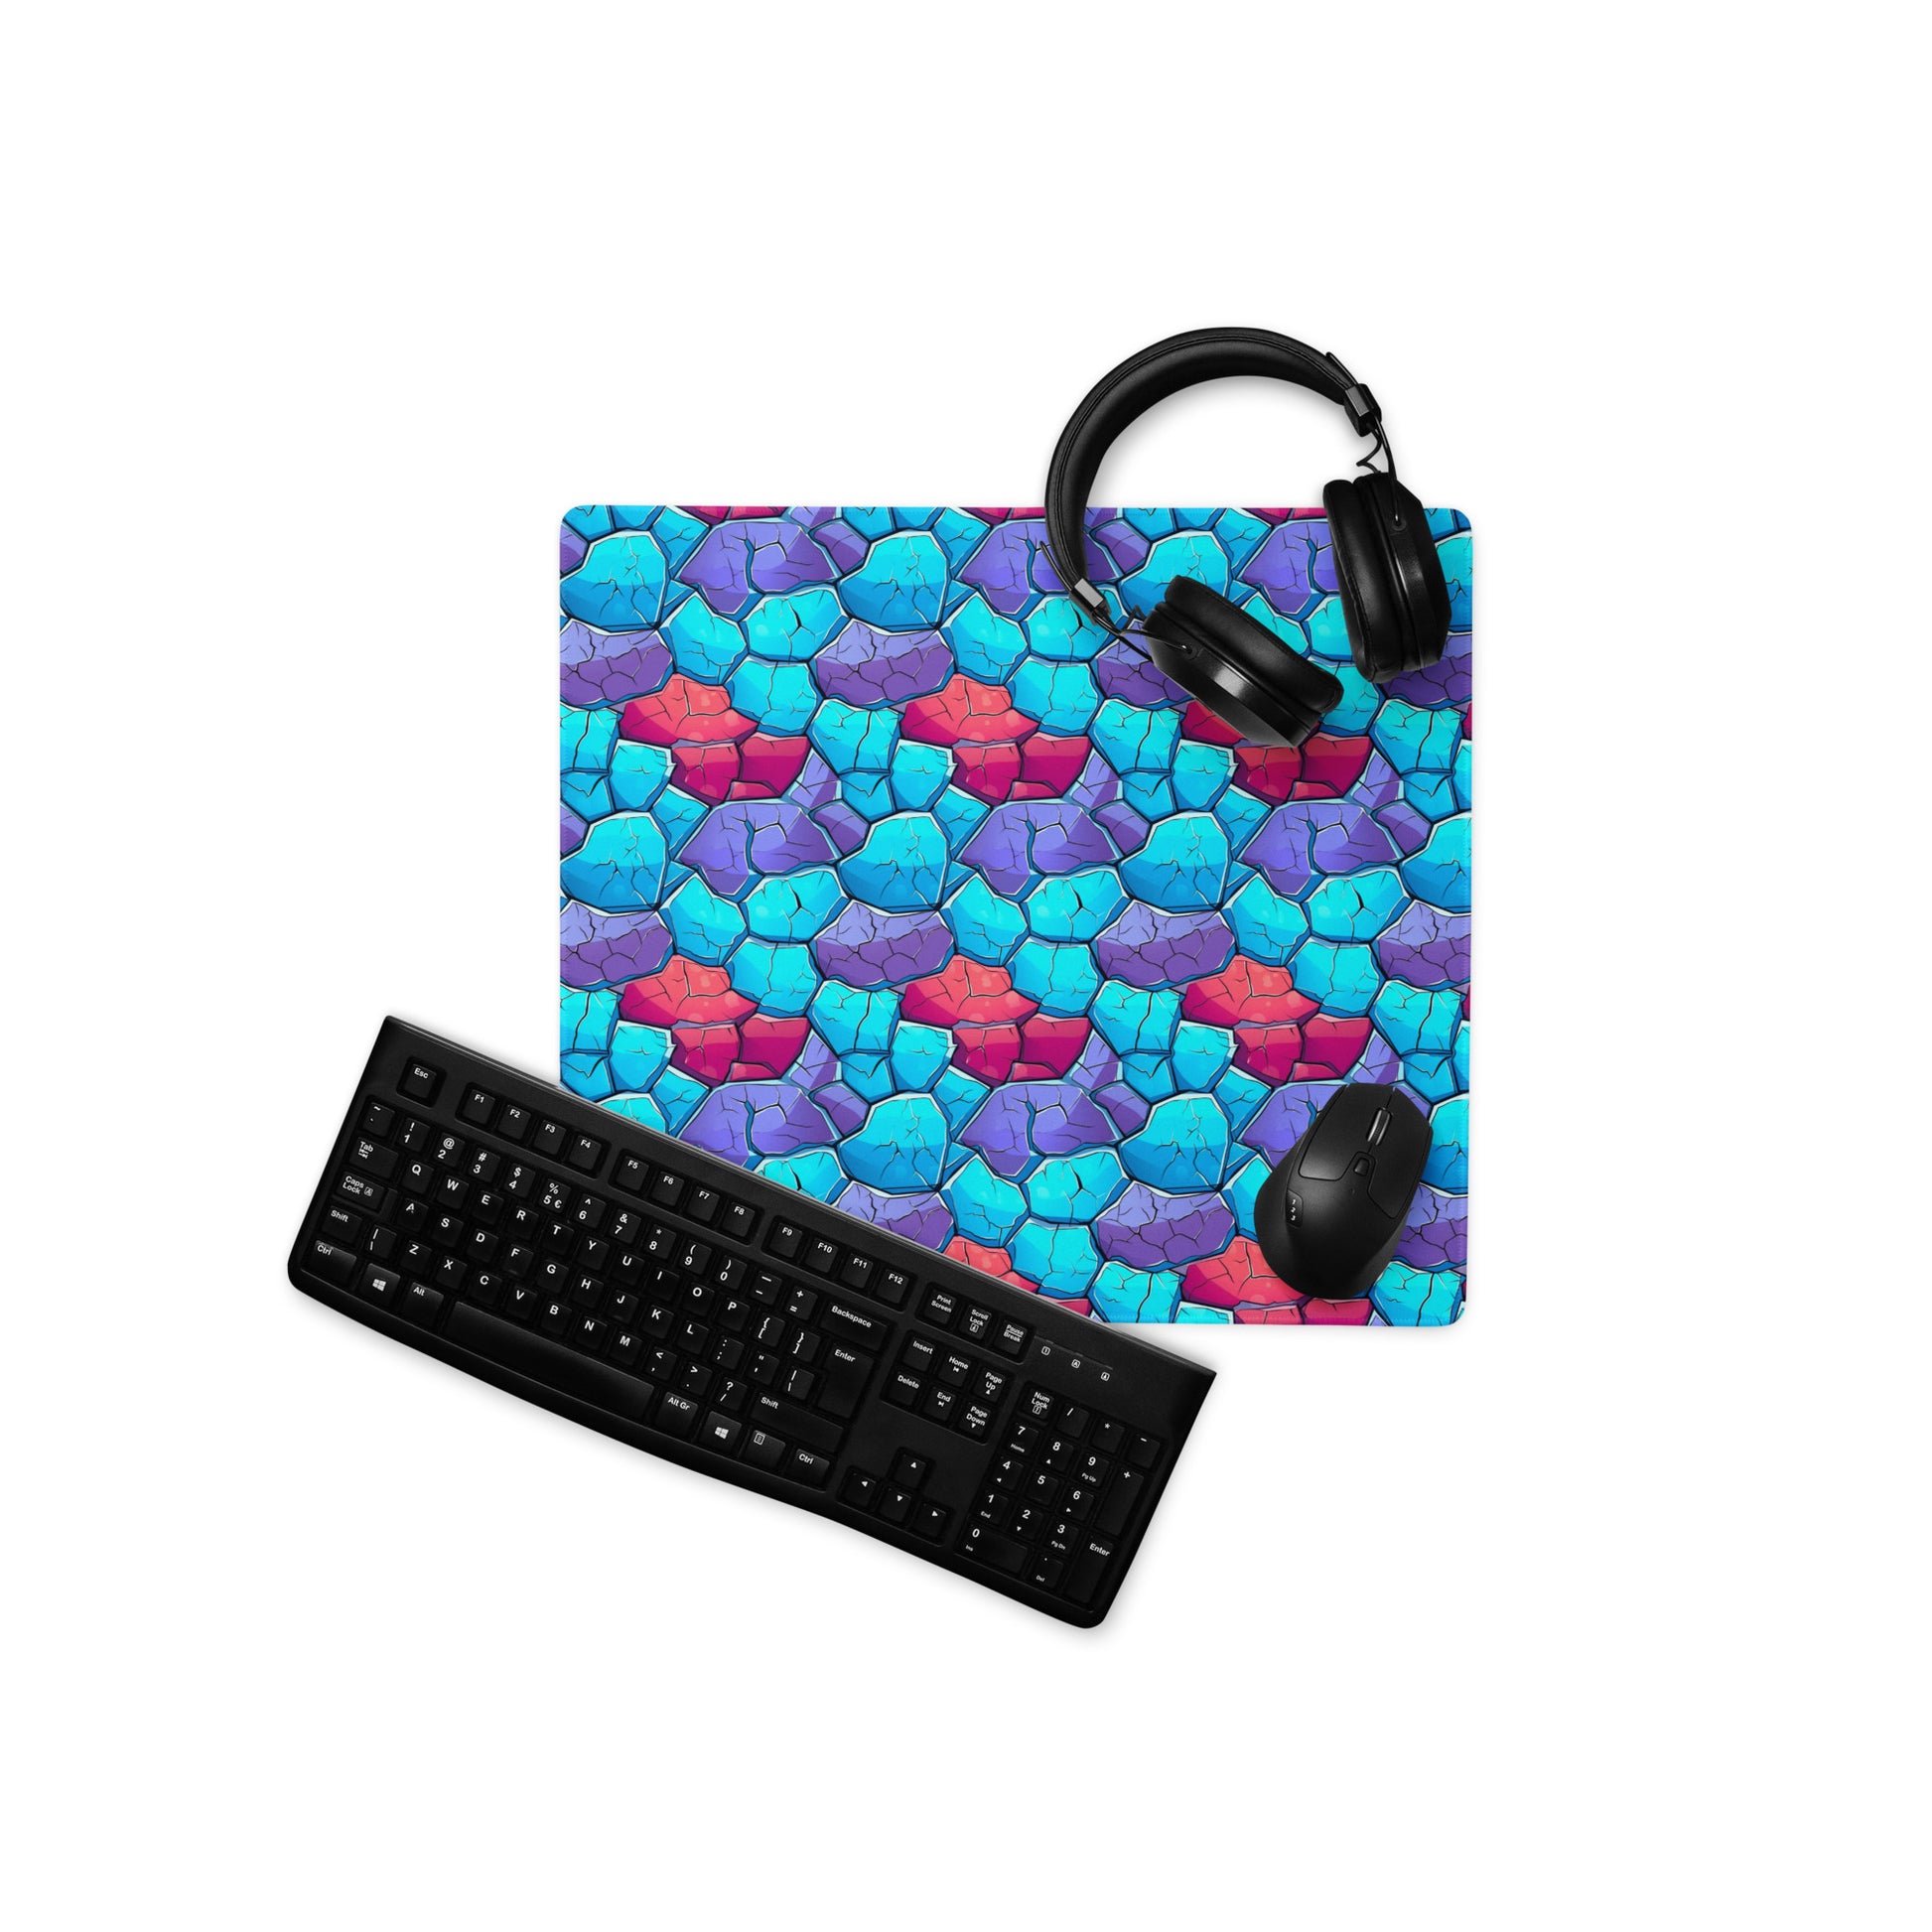 An 18" x 16" gaming desk pad with blue, red, and purple crystals. A keyboard, mouse, and headphones sit on it.